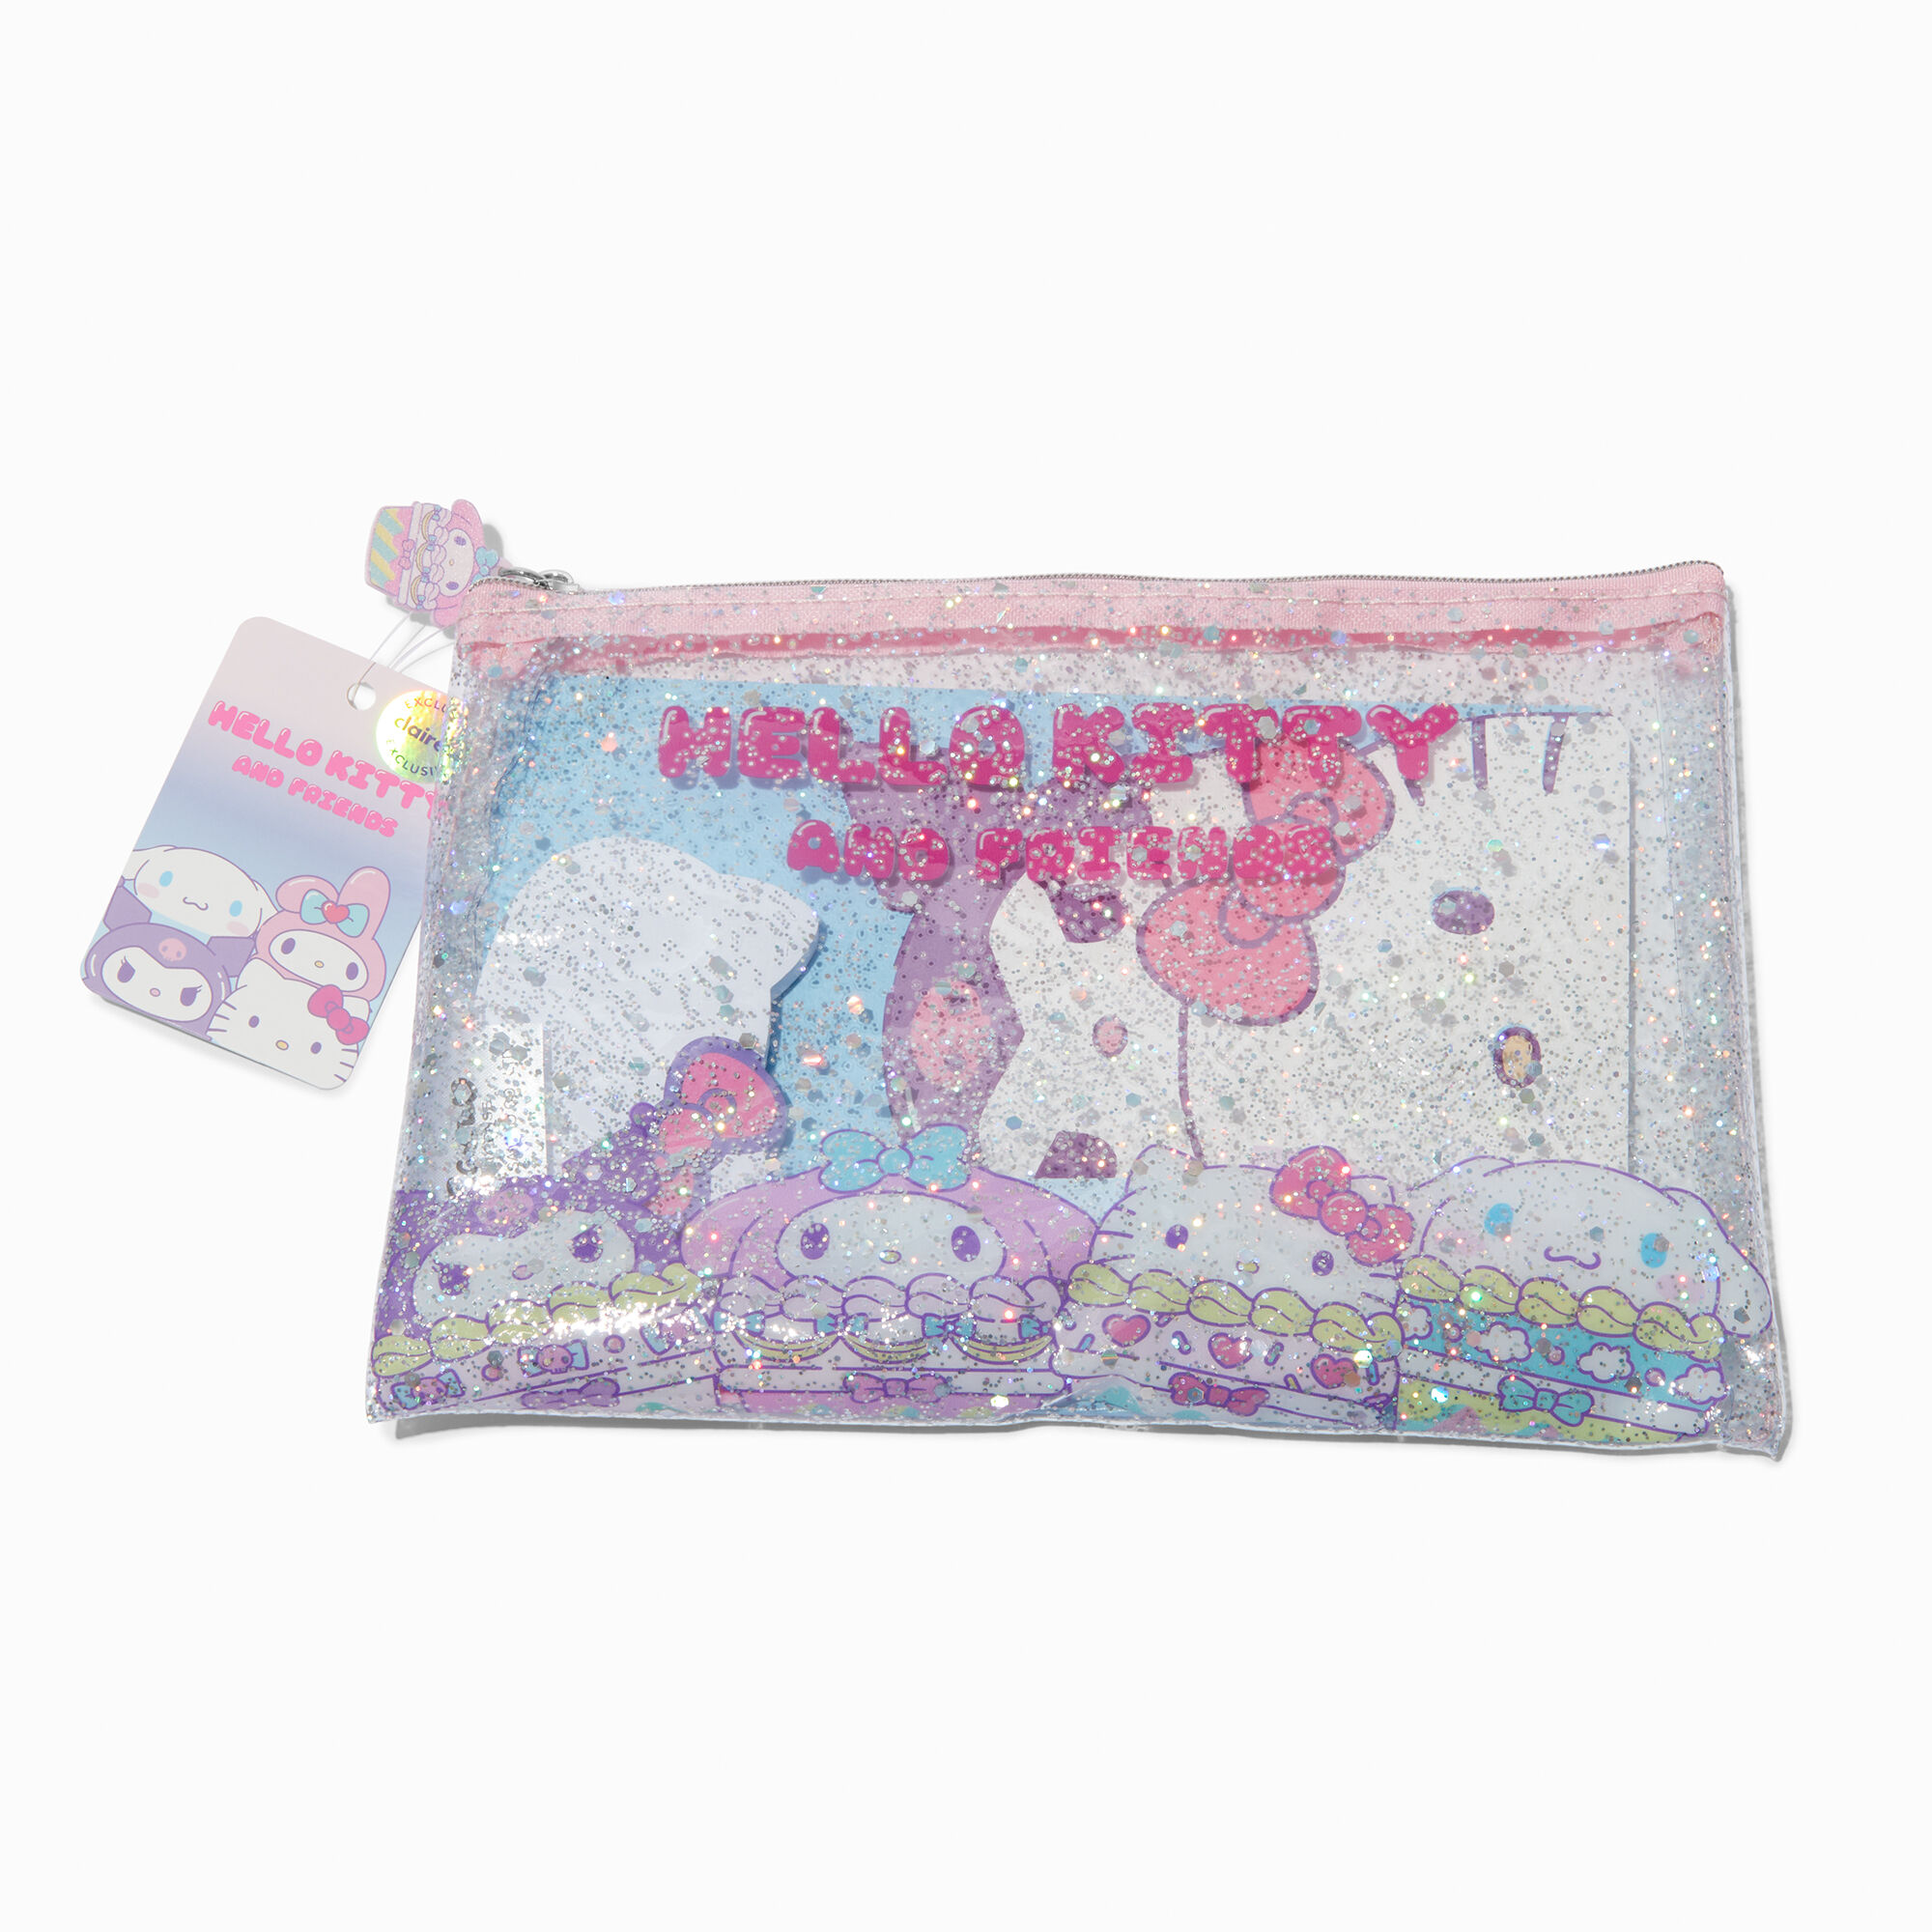 View Hello Kitty And Friends Claires Exclusive Stationery Set information